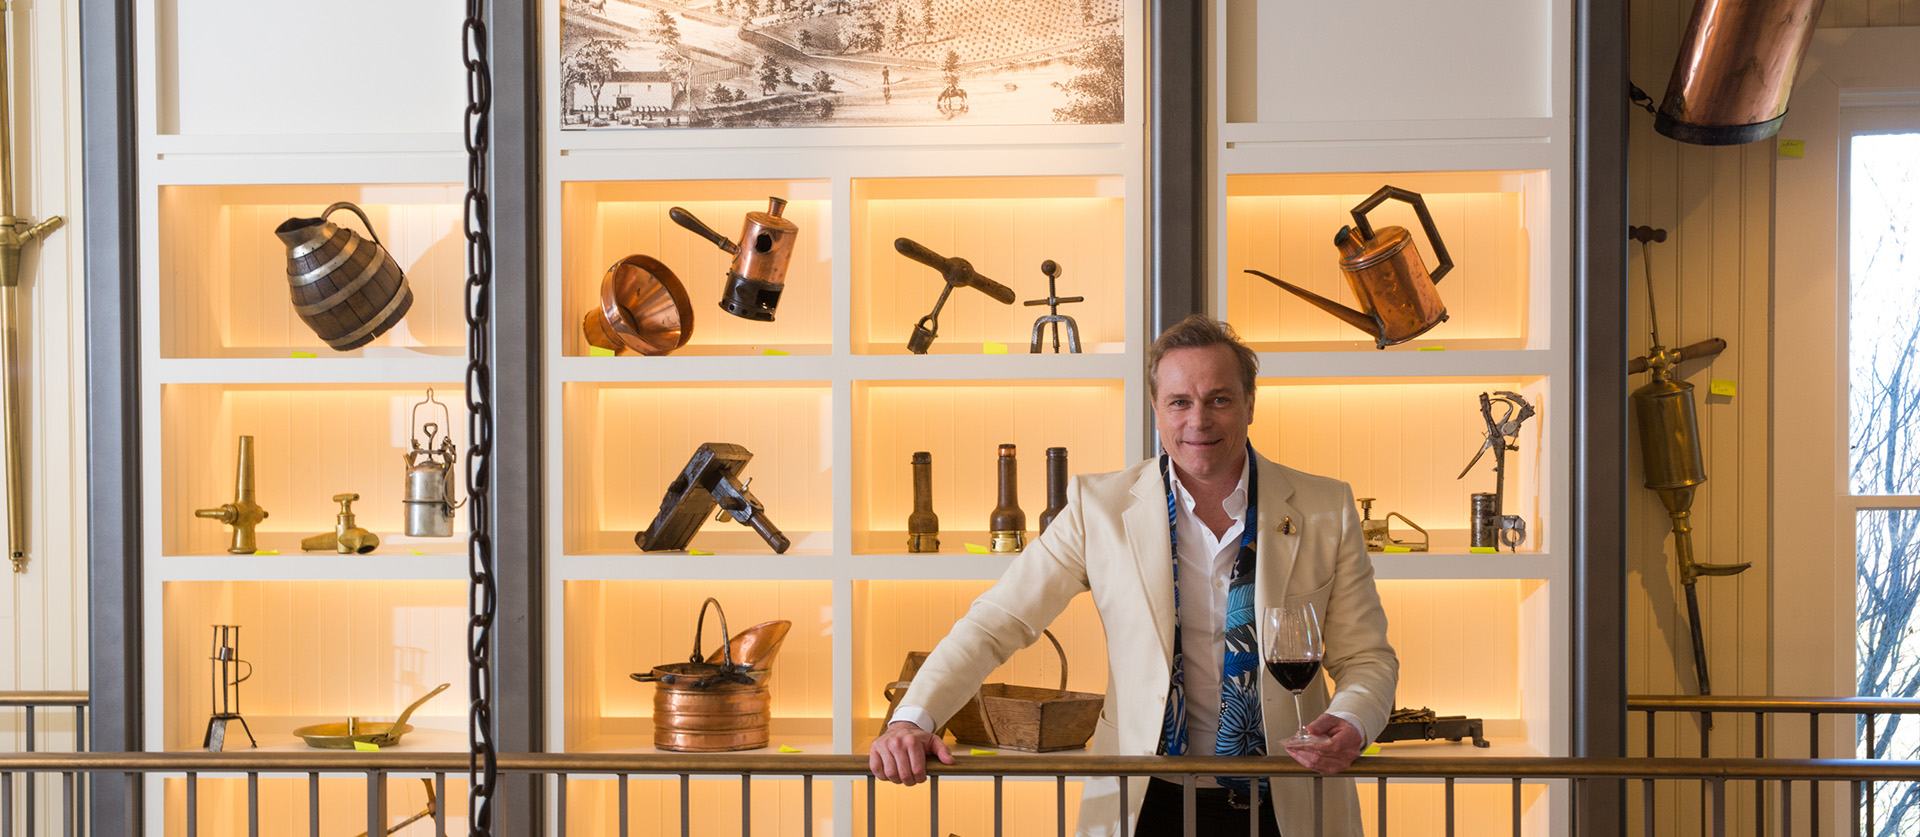 Jean-Charles Boisset at the 1881 Napa Wine History Museum